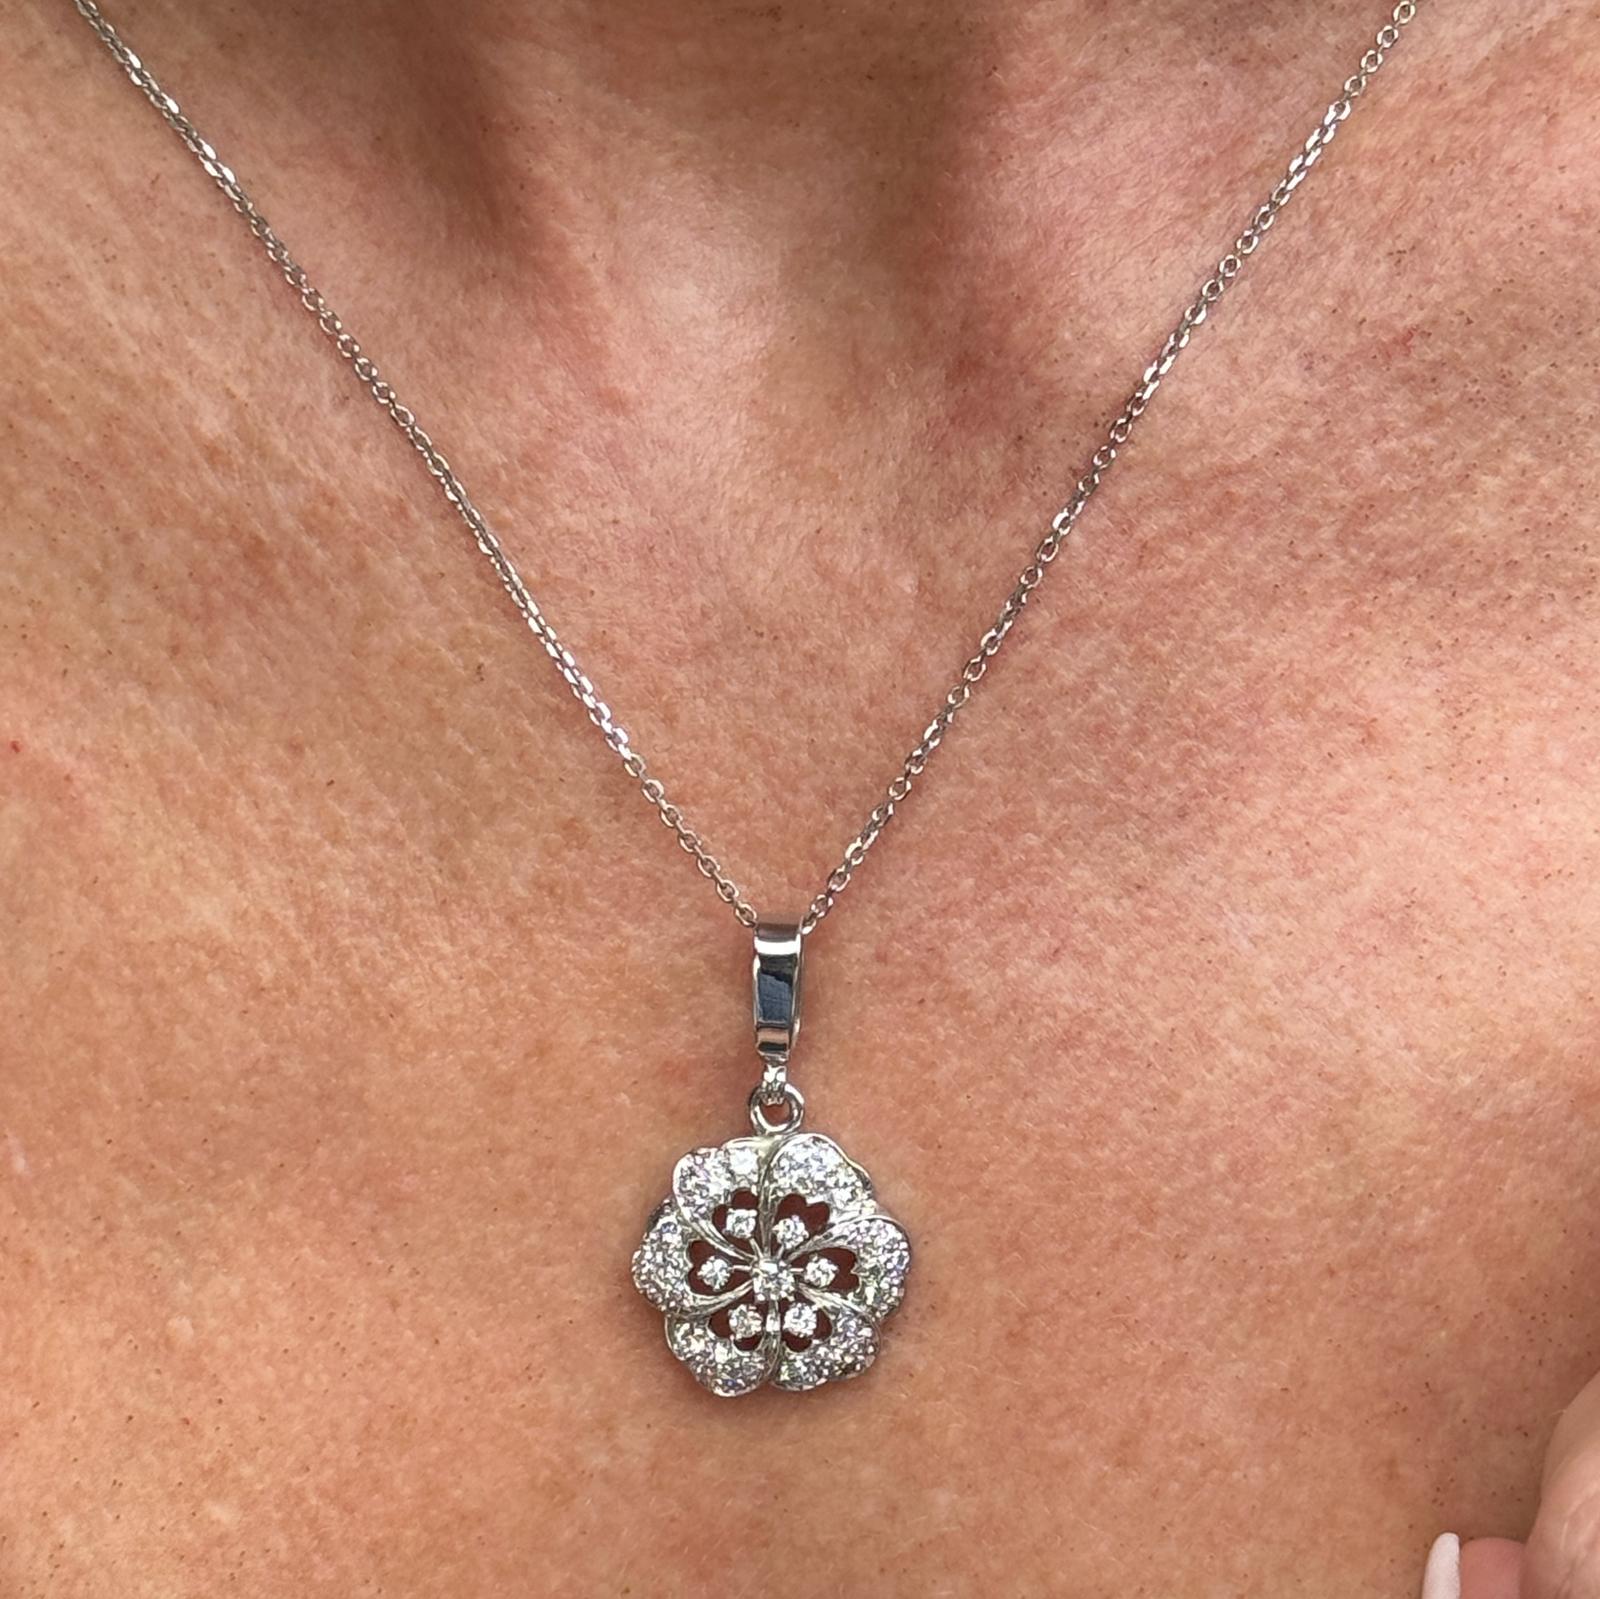 Beautiful modern diamond floral pendant necklace crafted in platinum with a 14 karat white gold baile and chain. The pendant features round brilliant cut diamonds weighing approximately 1.00 carat total weight and graded H-I color and SI clarity.